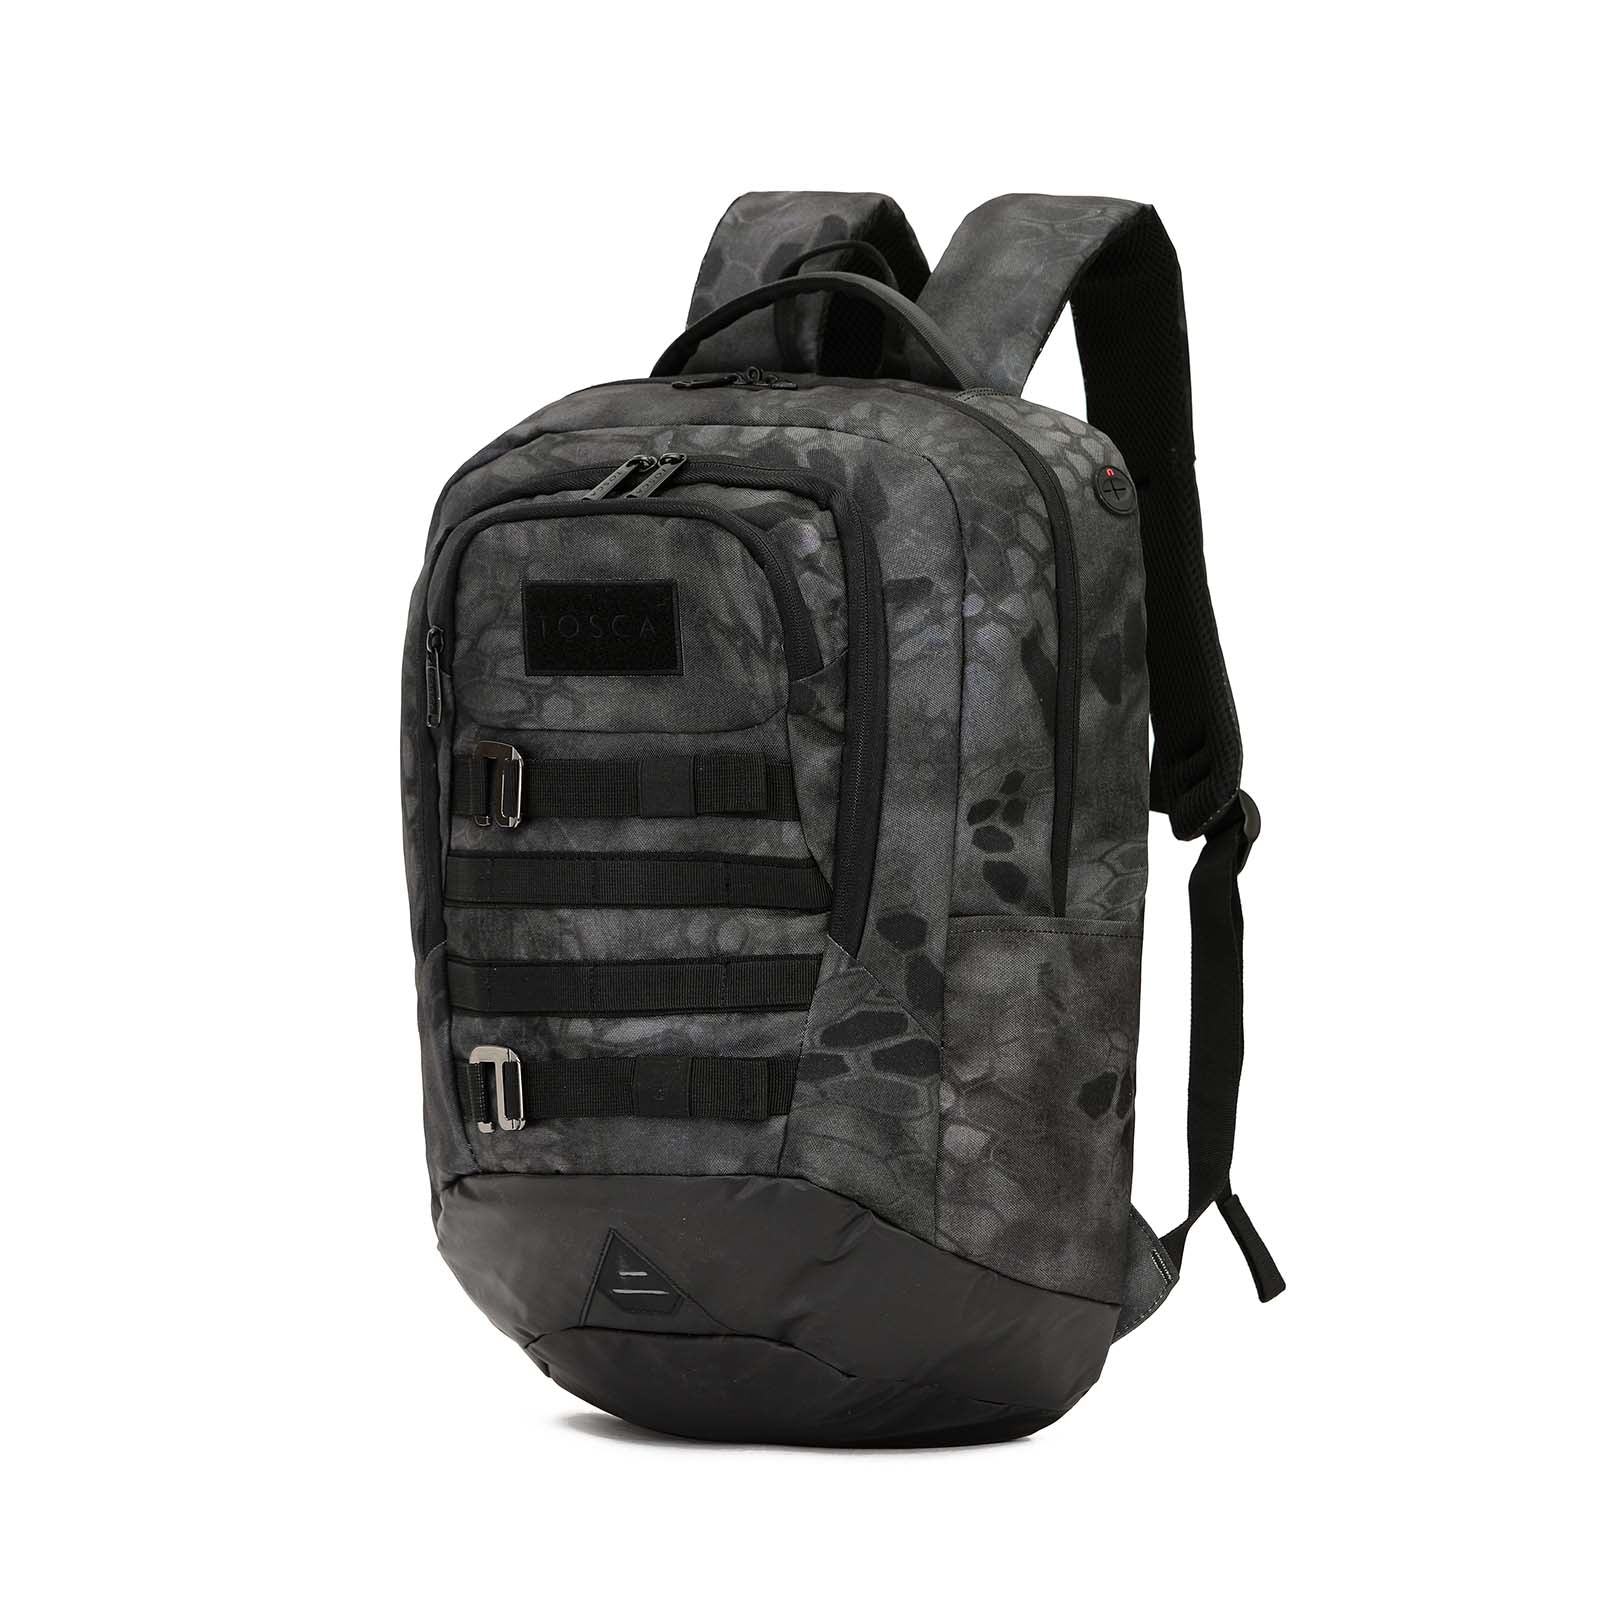 tosca-laptop-compartment-backpack-35l-grey-camo-front-angle